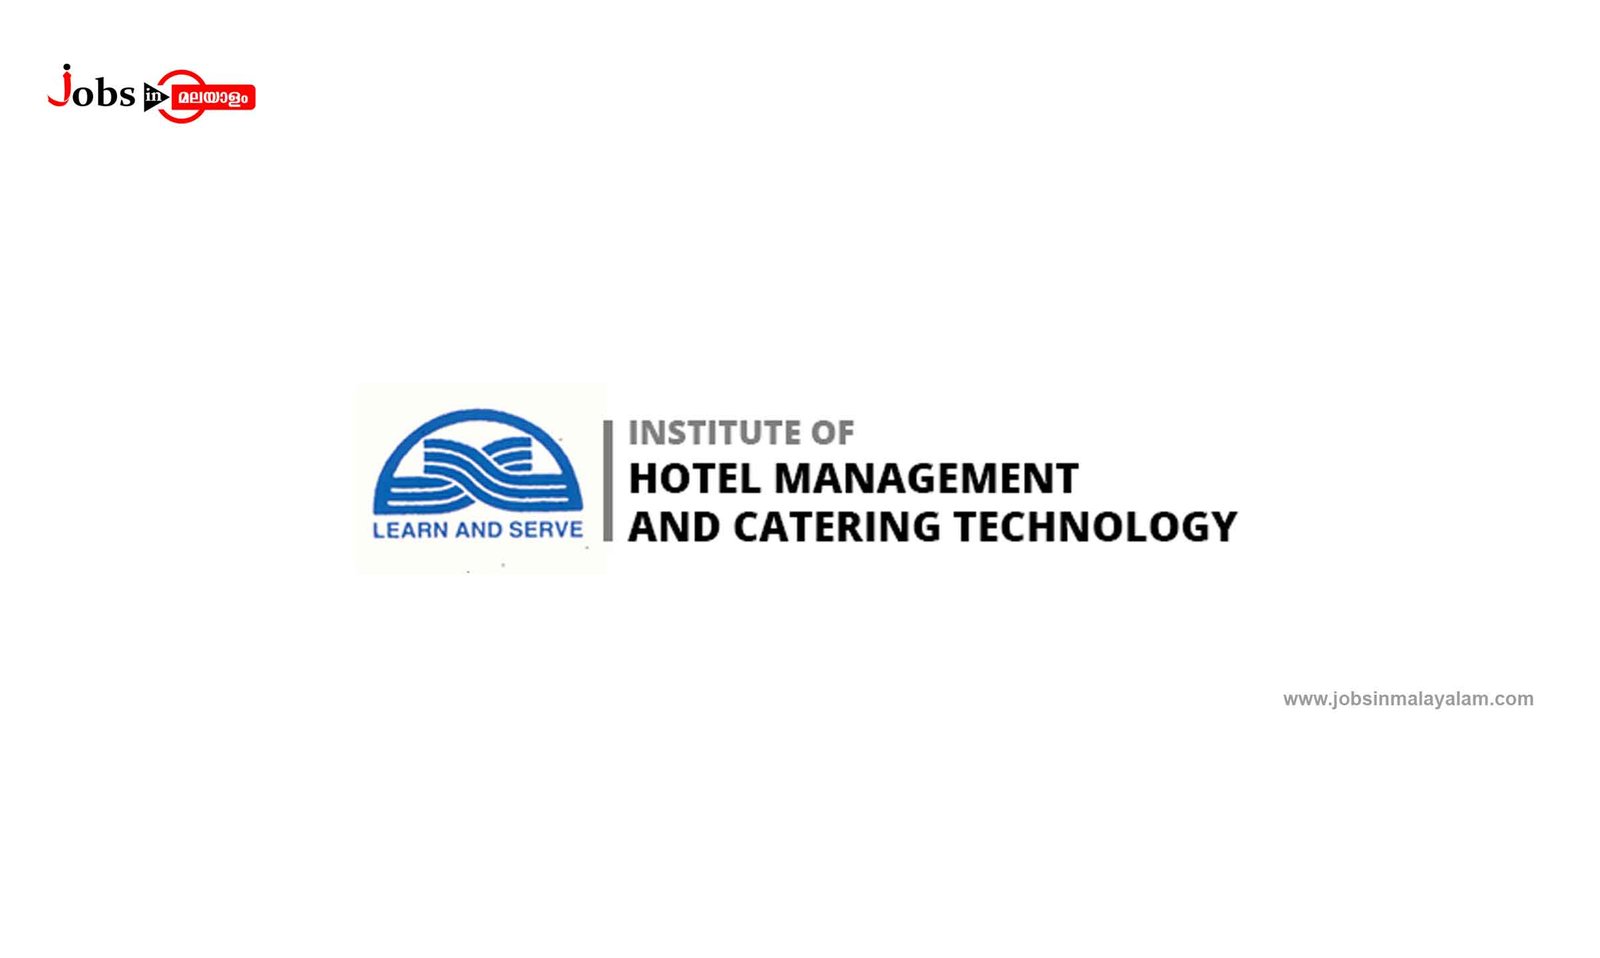 Institute of Hotel Management And Catering Technology